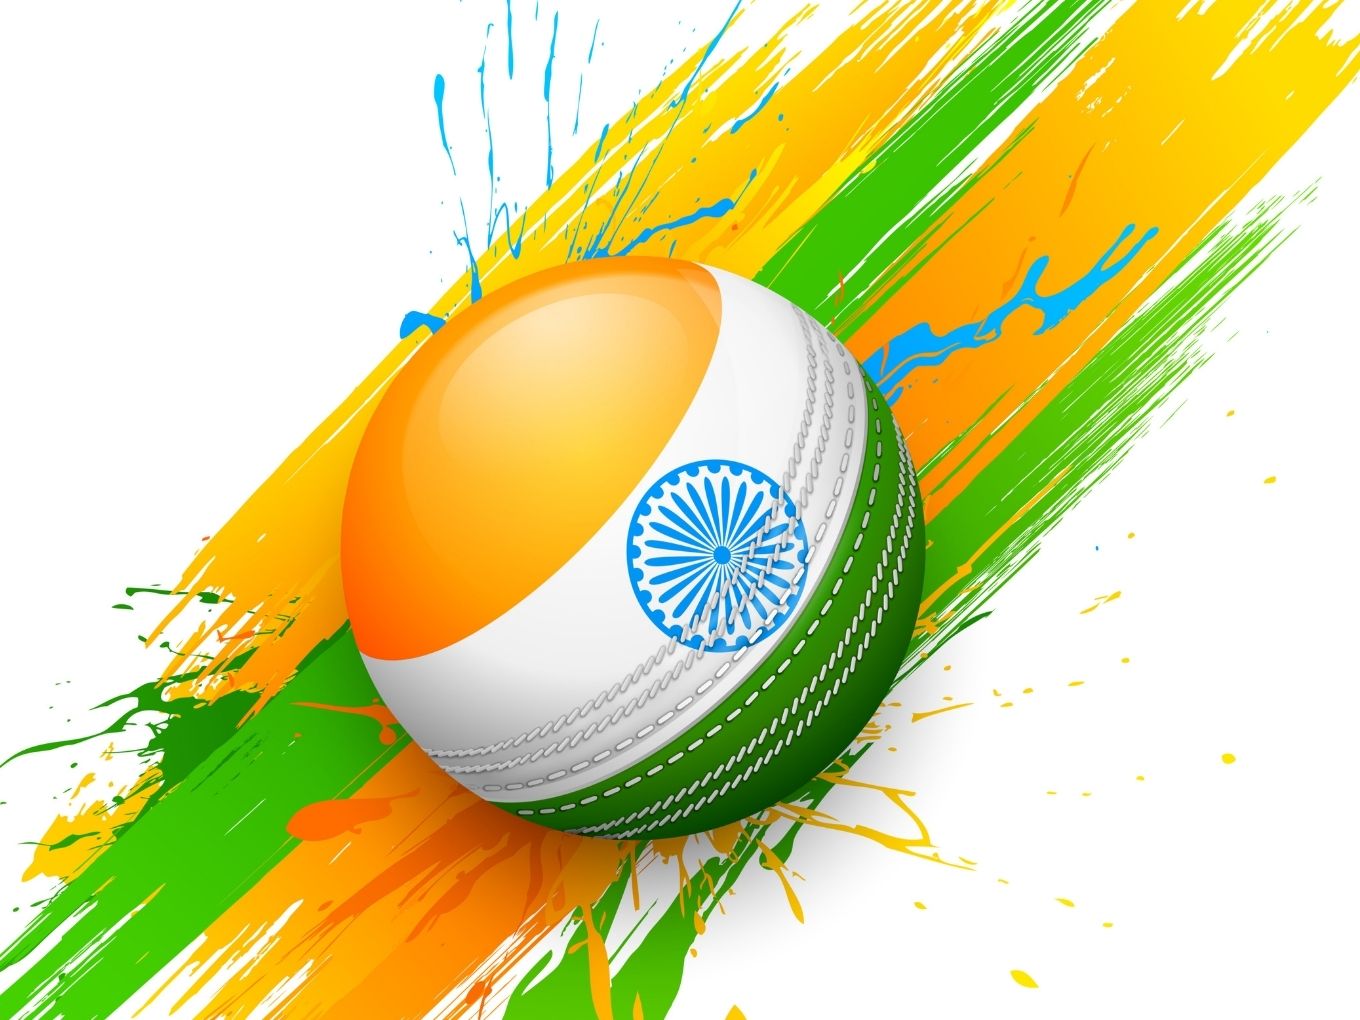 India's kit sponsor changes without official announcement ahead of